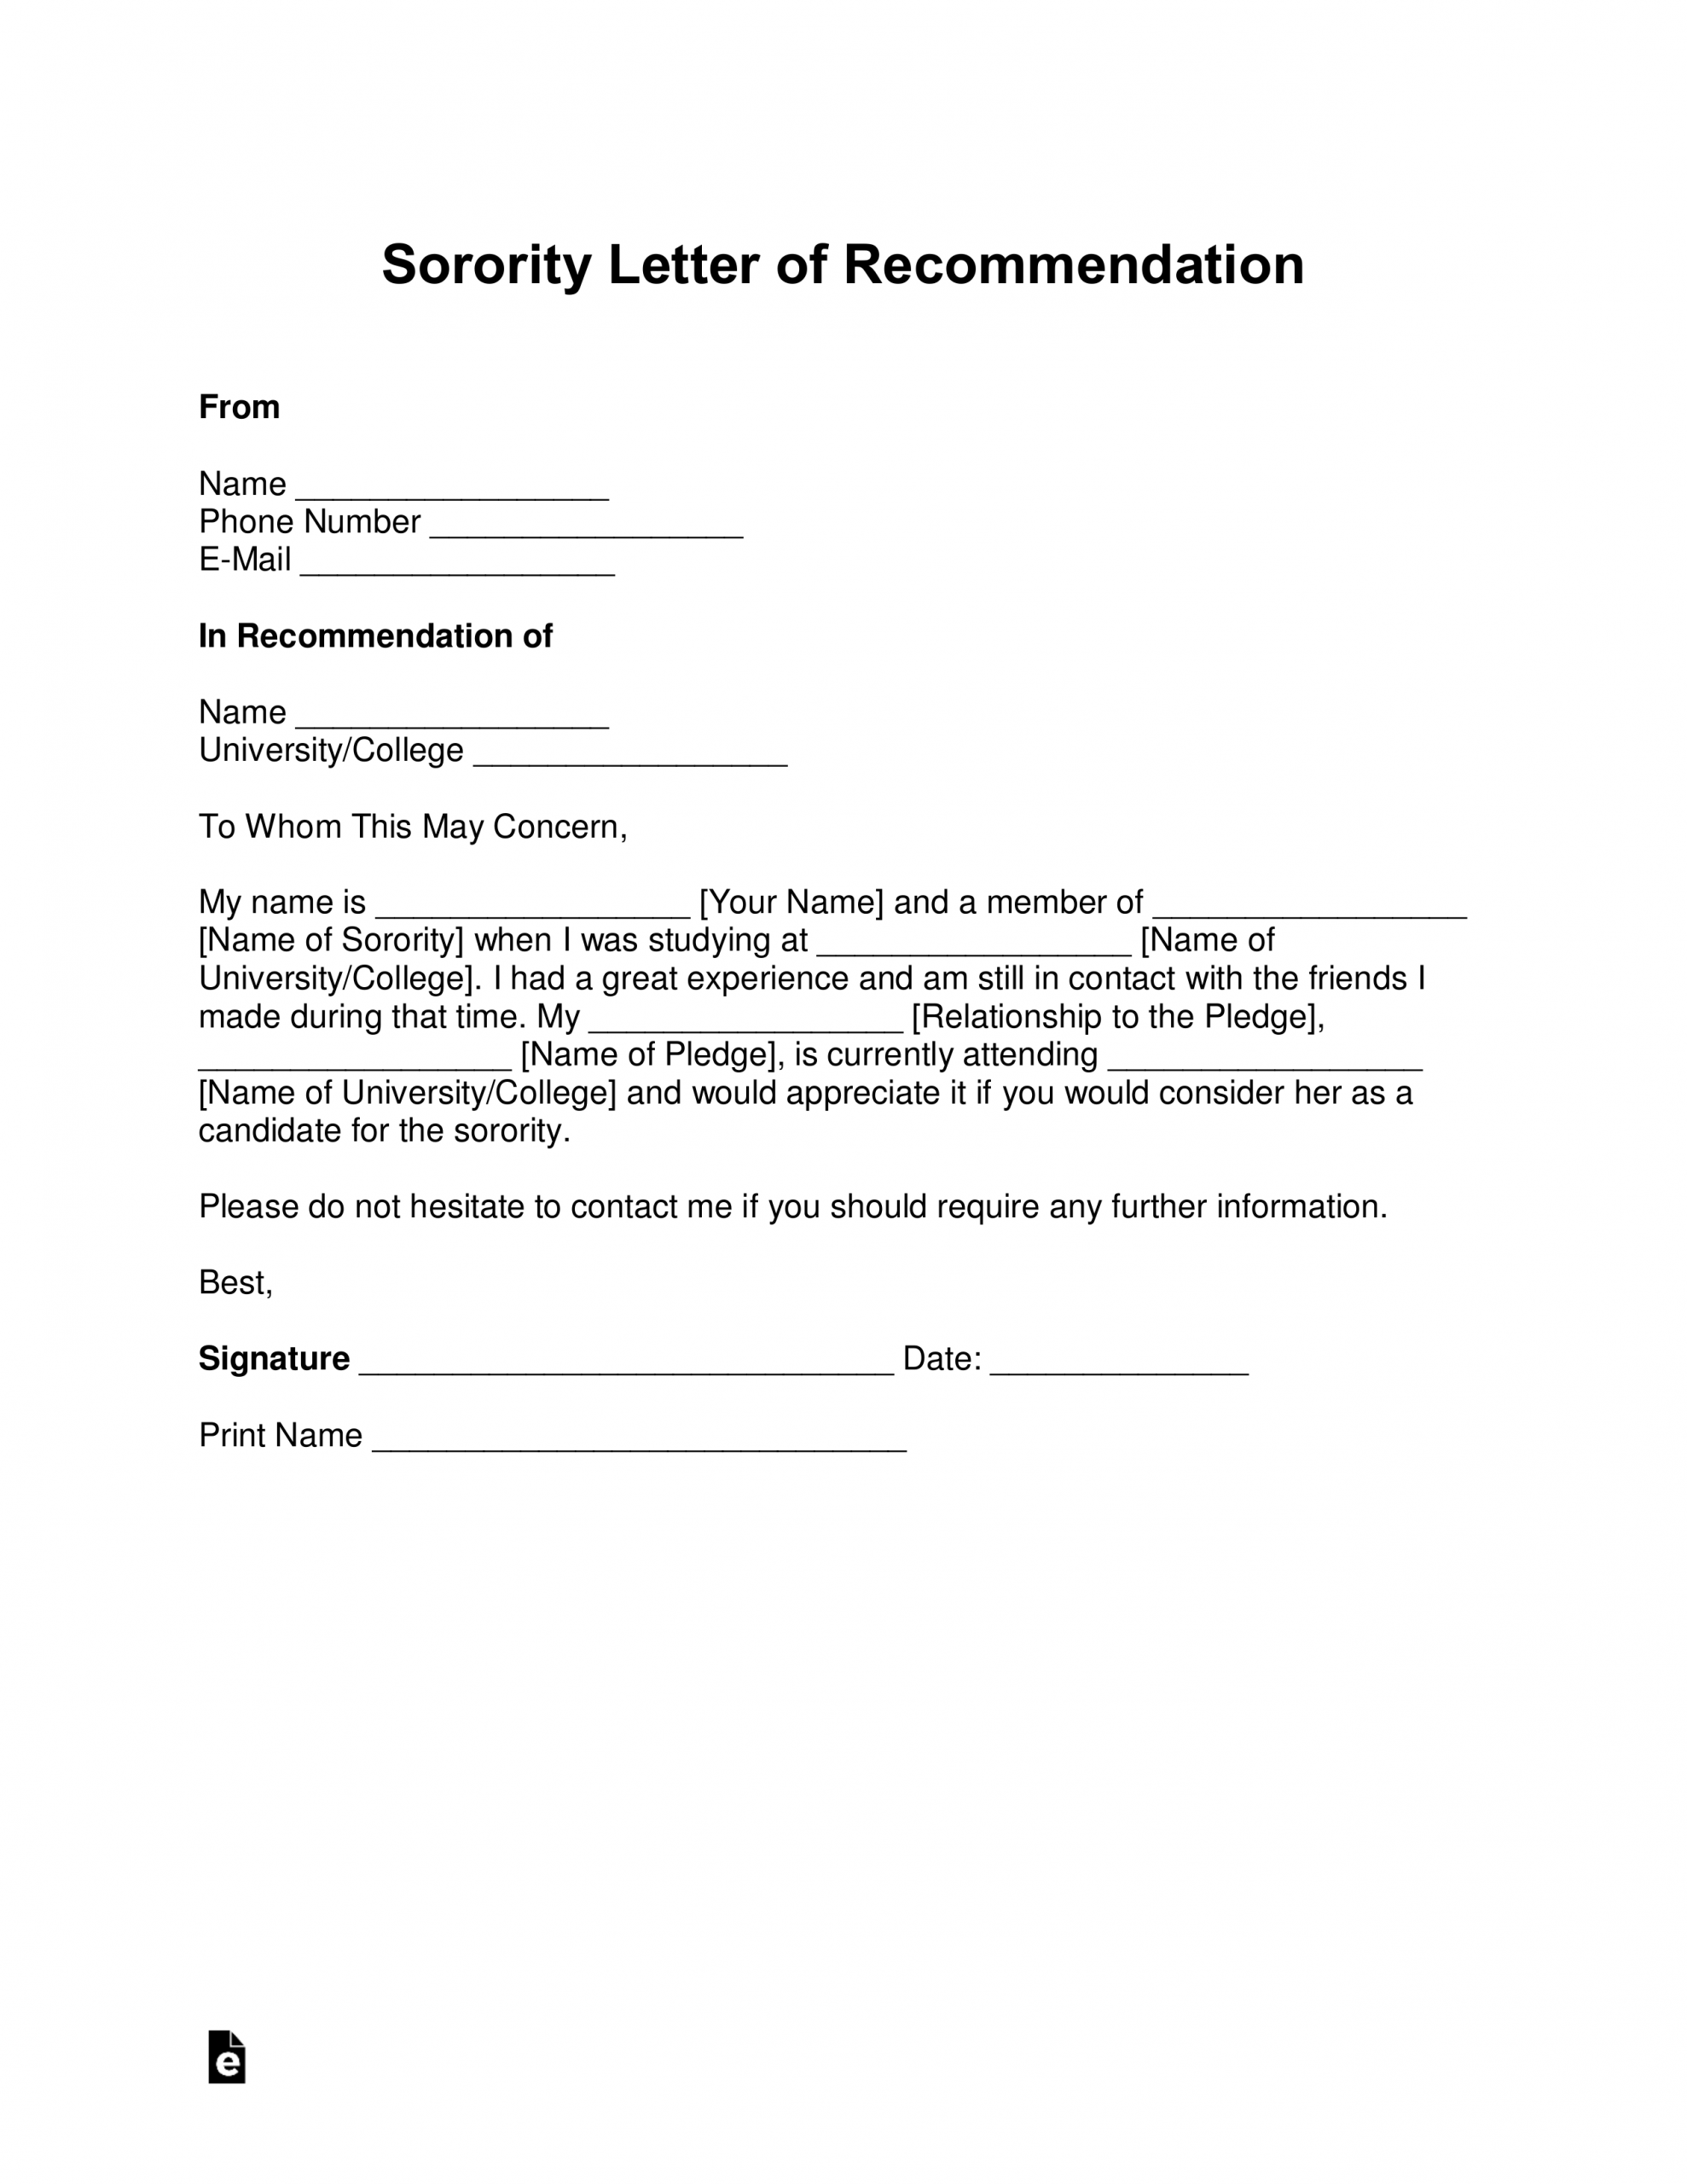 Sorority Letter Of Recommendation Akali with regard to dimensions 2550 X 3301